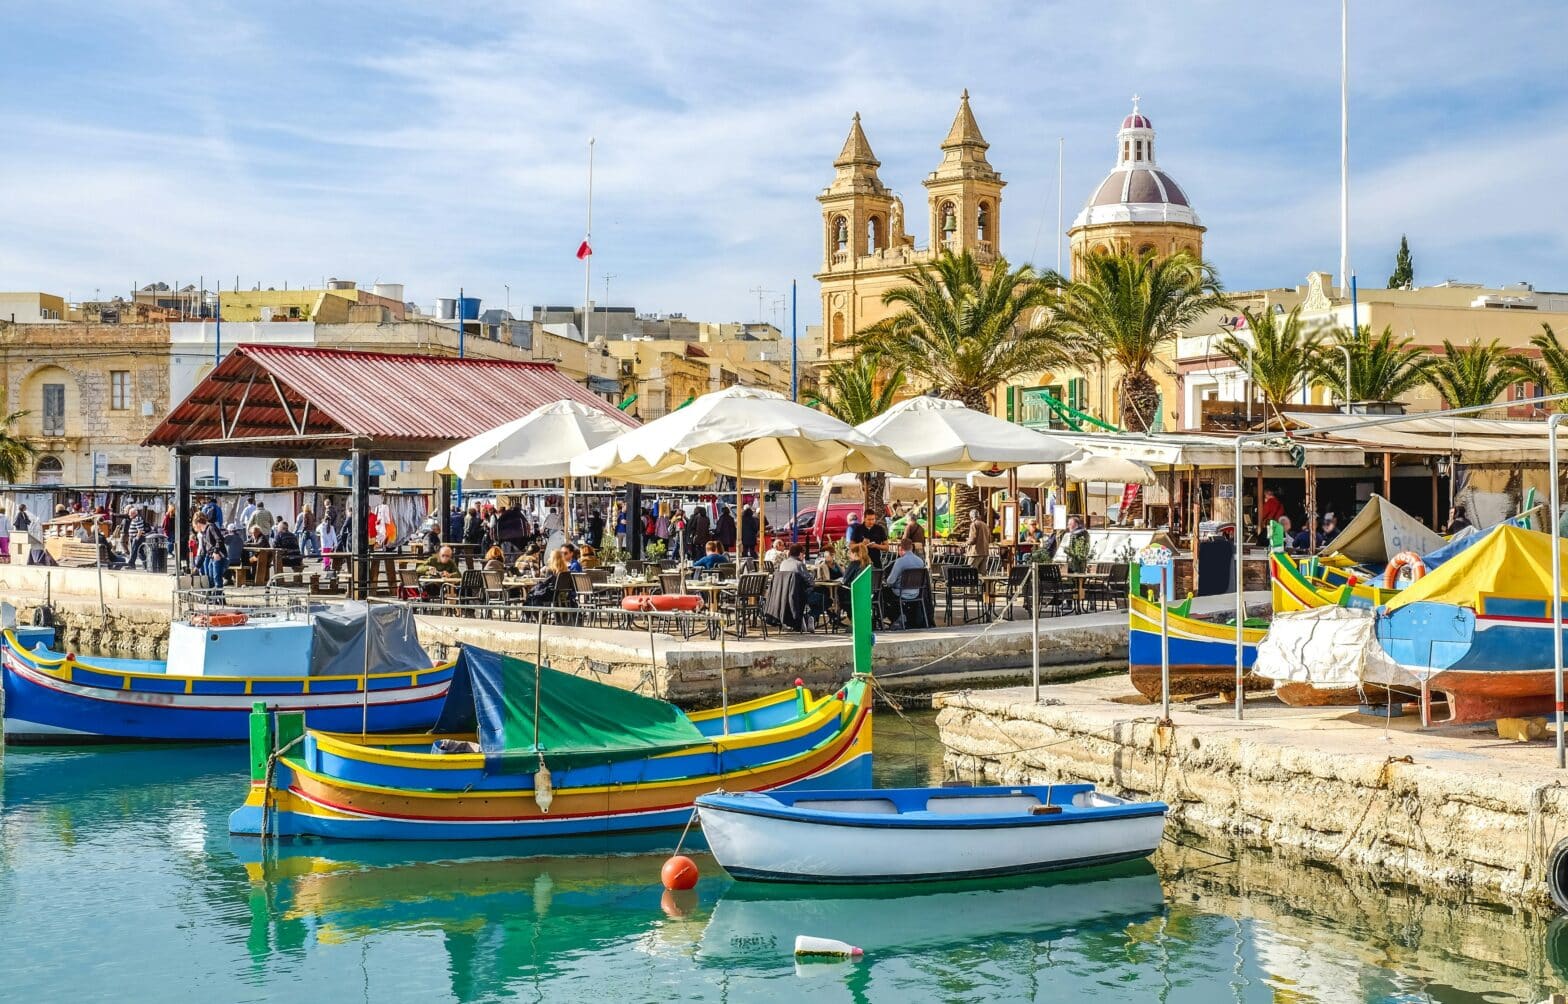 The cost of living in Malta